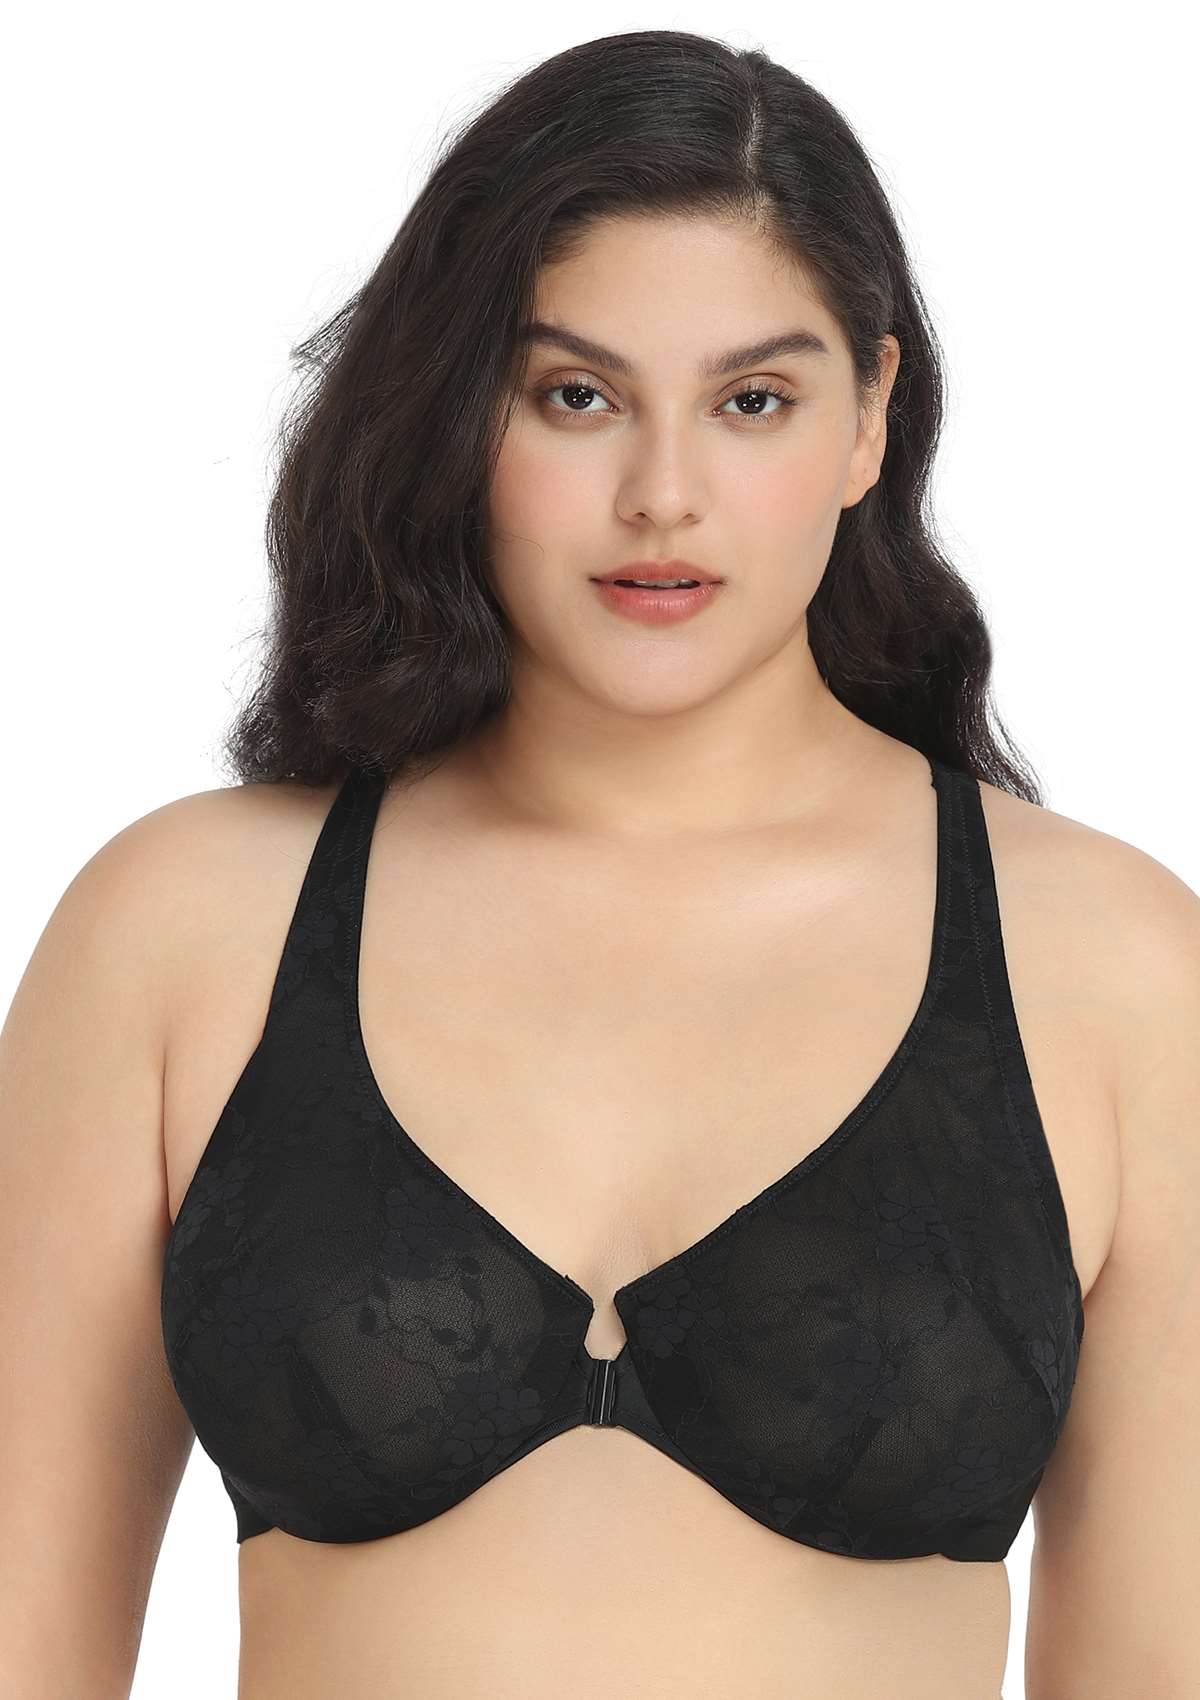 HSIA Spring Romance Front-Close Floral Lace Unlined Full Coverage Bra - Black / 42 / DD/E